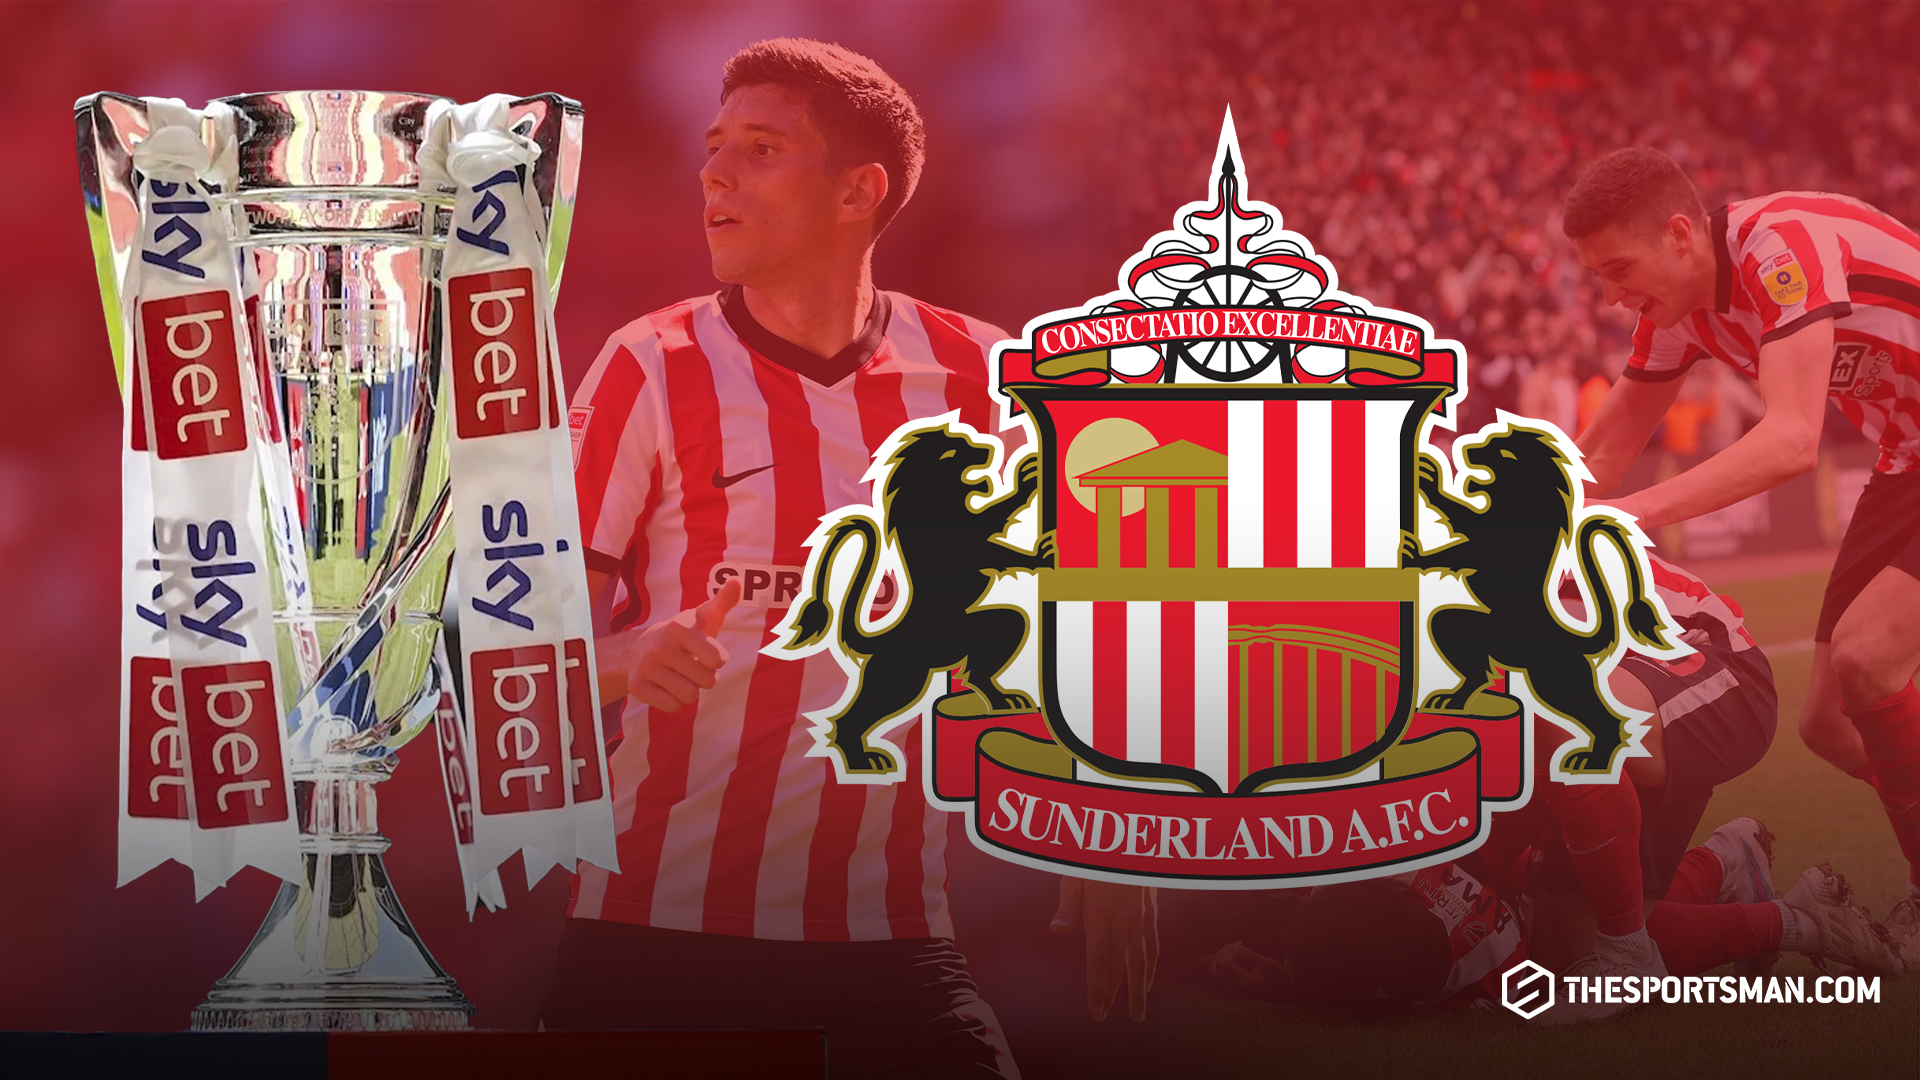 The Air Of Sunderland Magic That Could Take Them To The Premier League